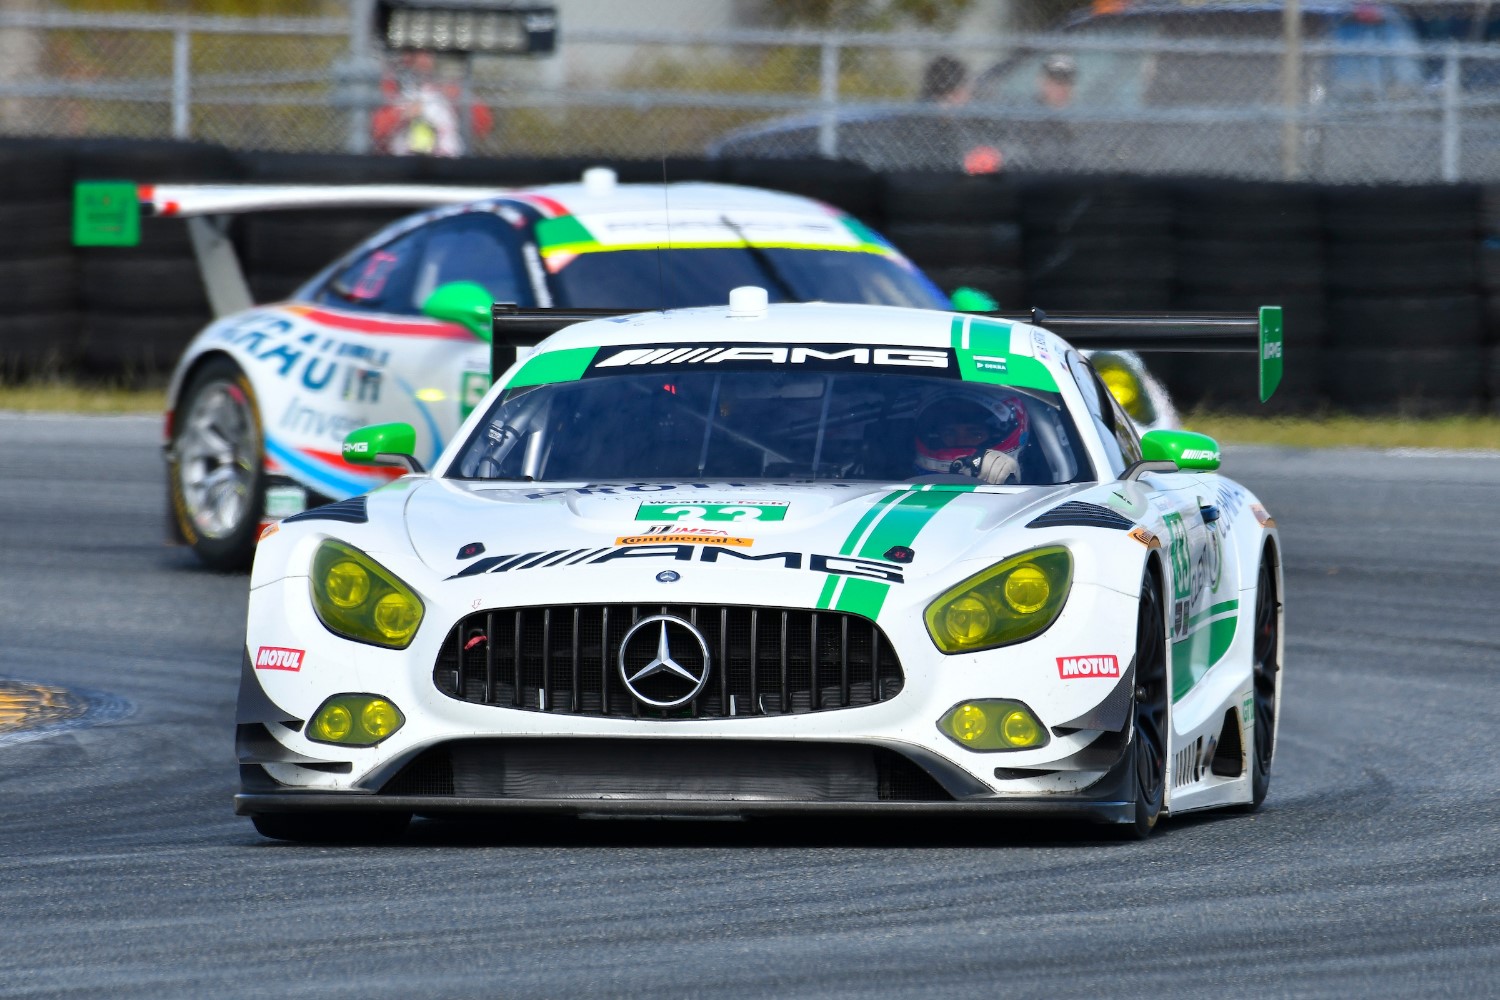 The #33 Mercedes narrowly leads GTD